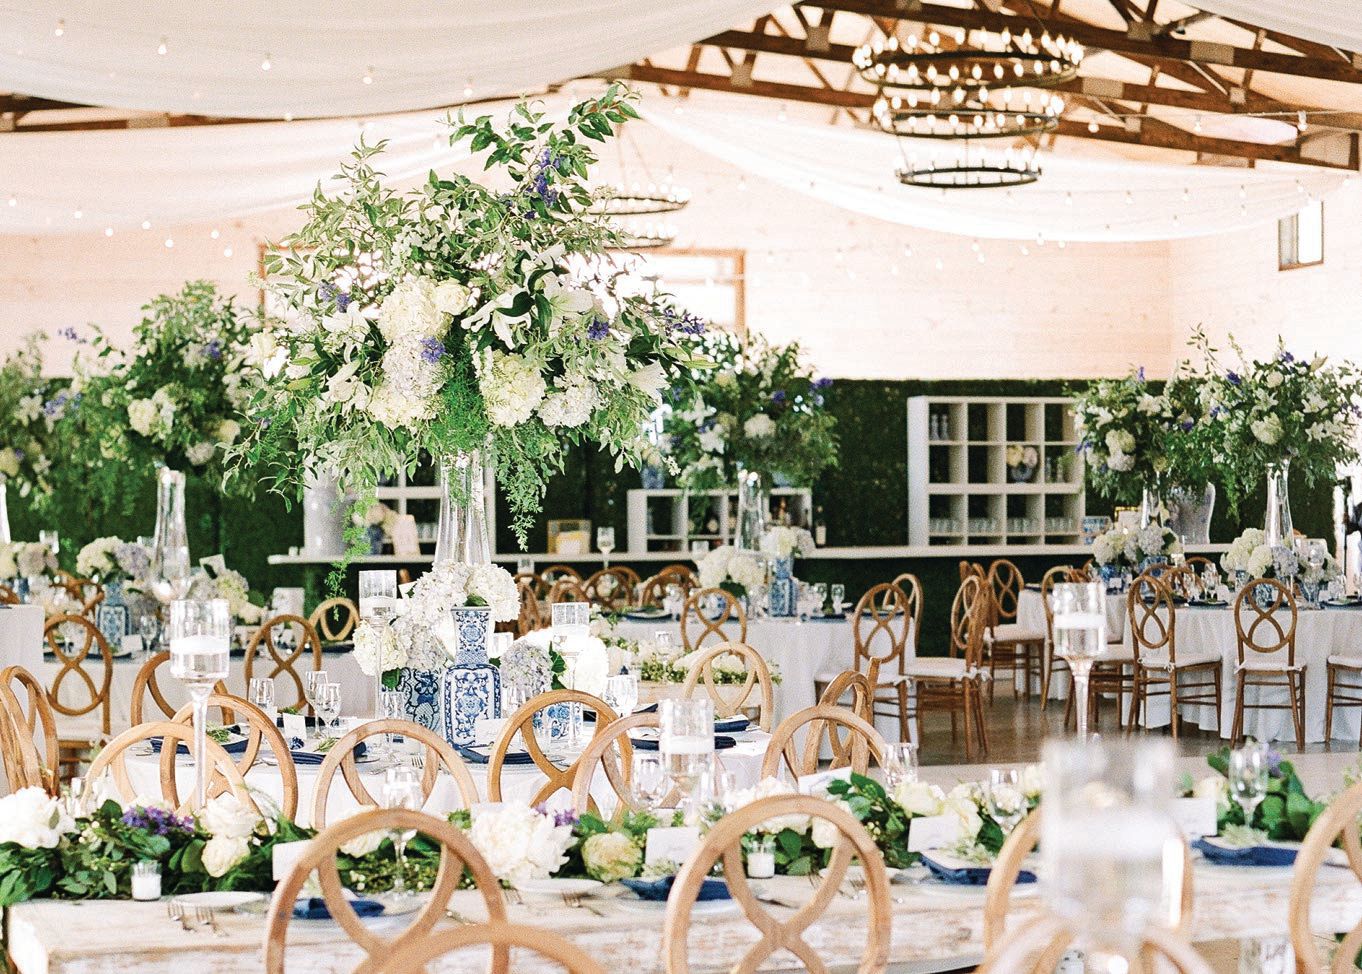 Danielle Elder made every detail count at a ginger jar blue-and-white barn party. GINGER JAR BLUE-AND-WHITE PARTY PHOTOS BY TWAH DOUGHERTY